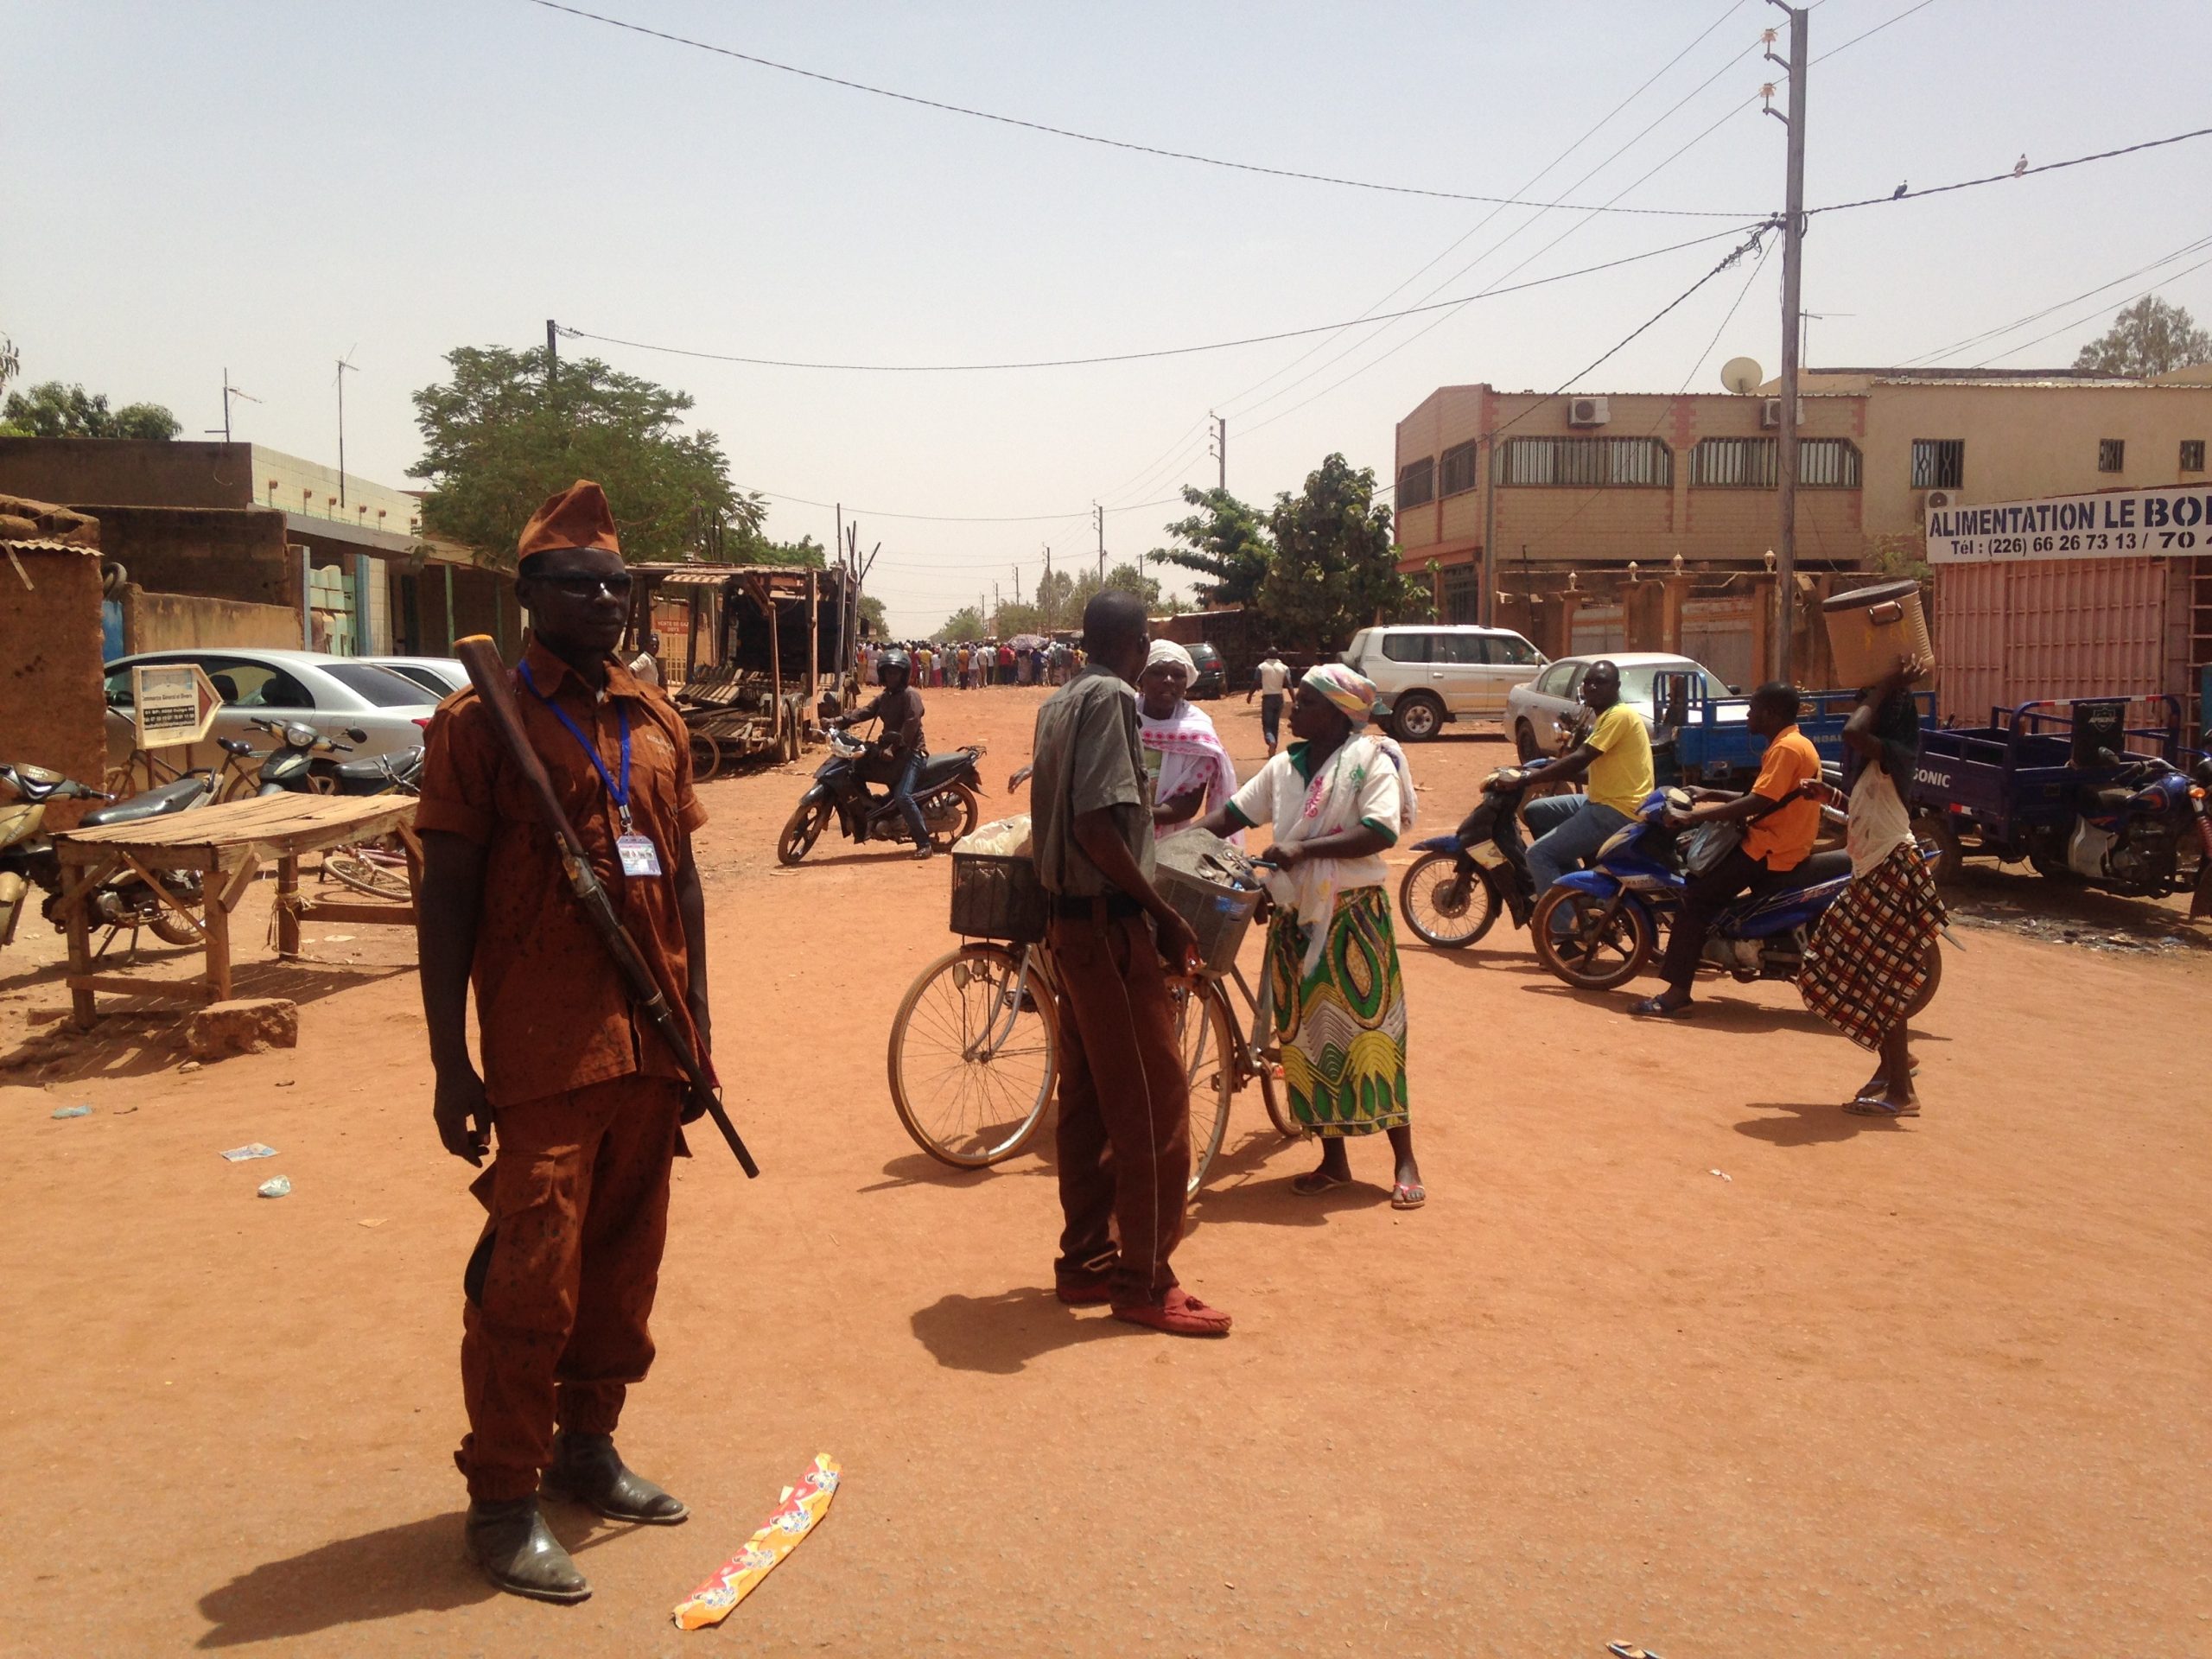 Self-Defence Movements in Burkina Faso: Diffusion and Structuration of Koglweogo Groups